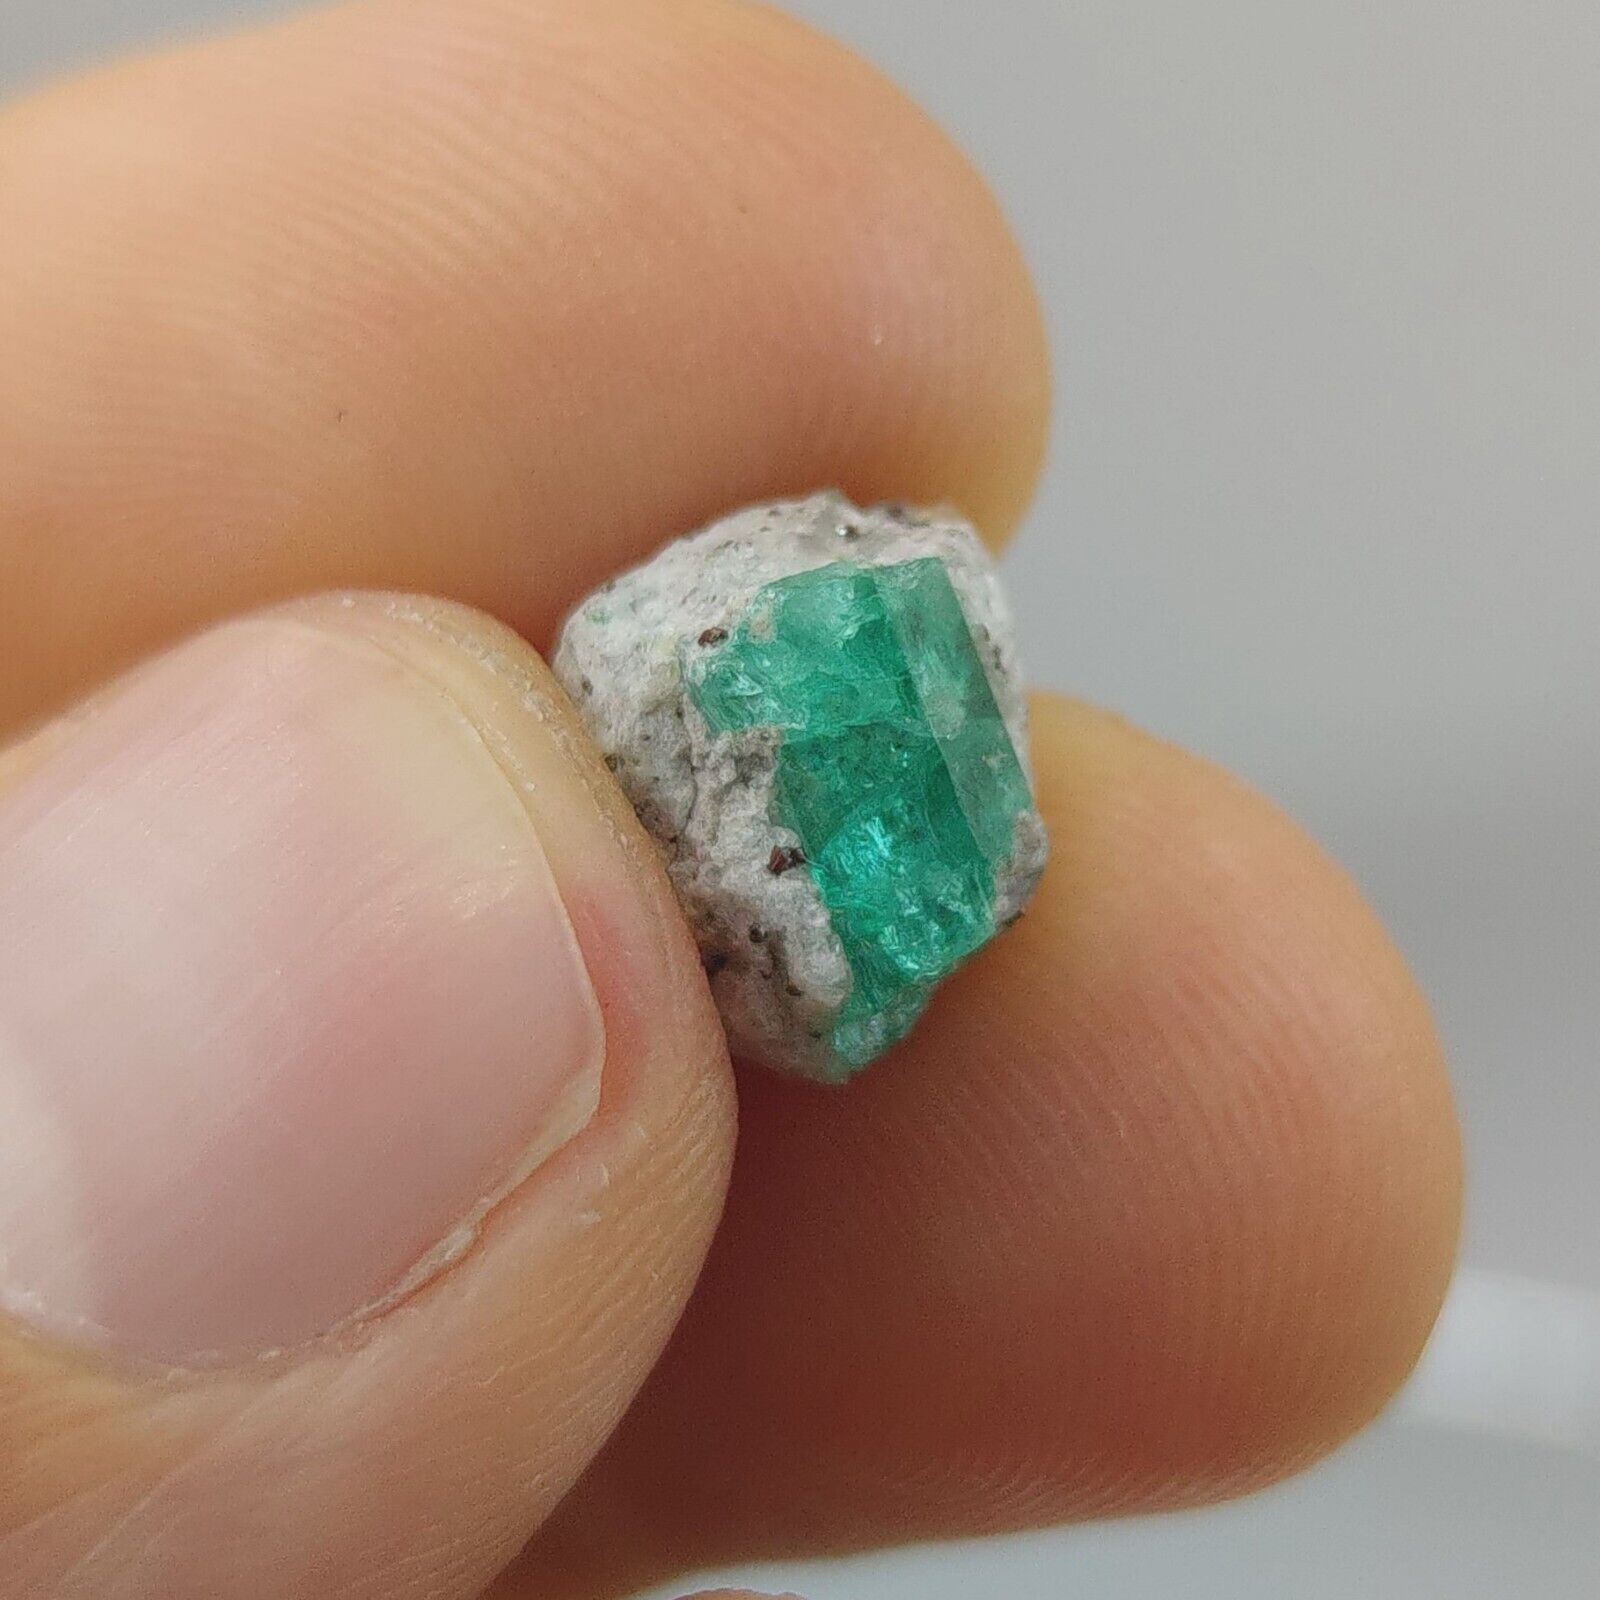 VERY CLEAR NATURAL EMERALD CRYSTAL ON MATRIX  FROM MUZO COLOMBIA 1.1 grams